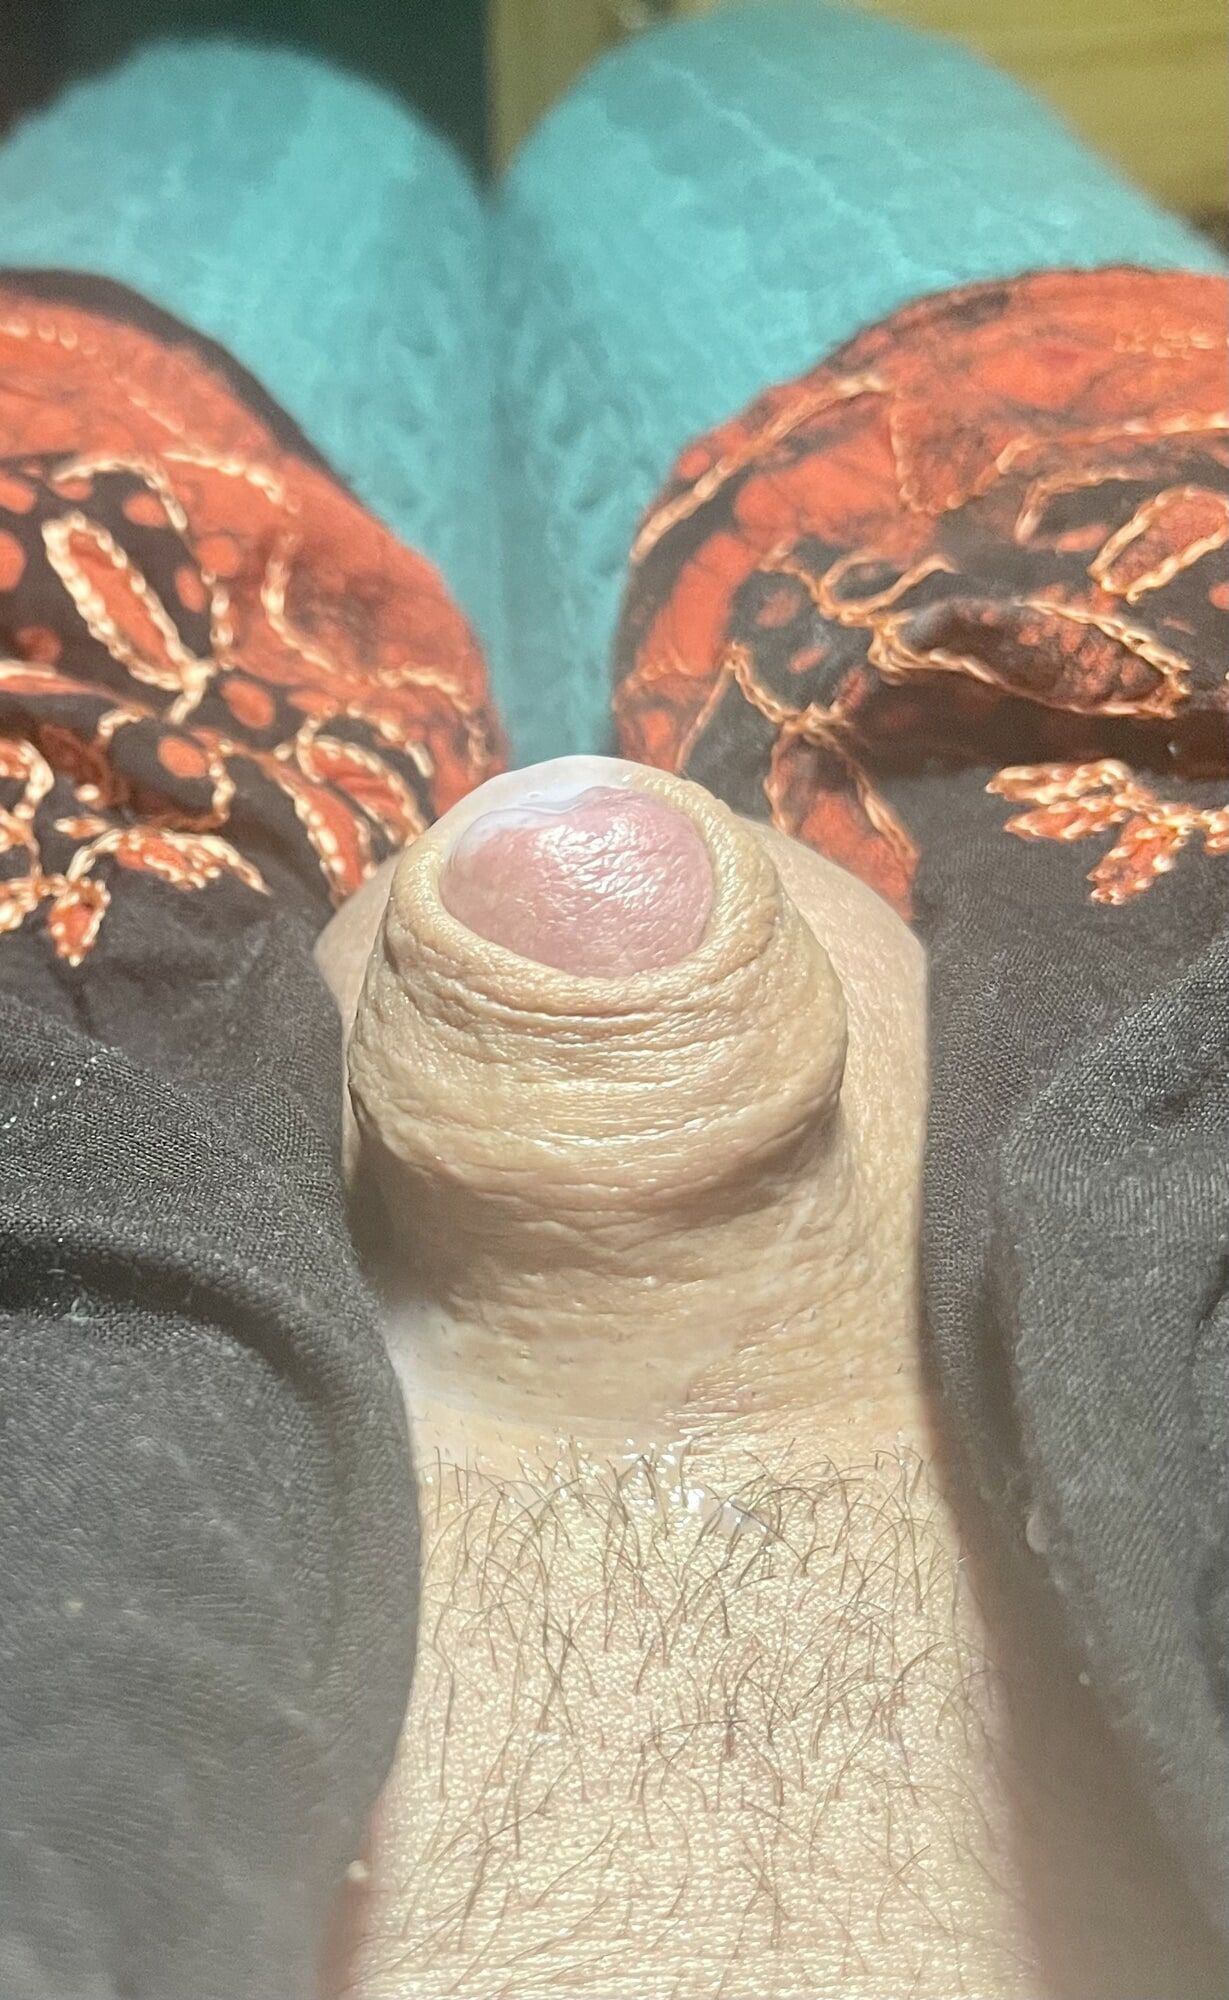 Tiny cock bitch dick any takers #16